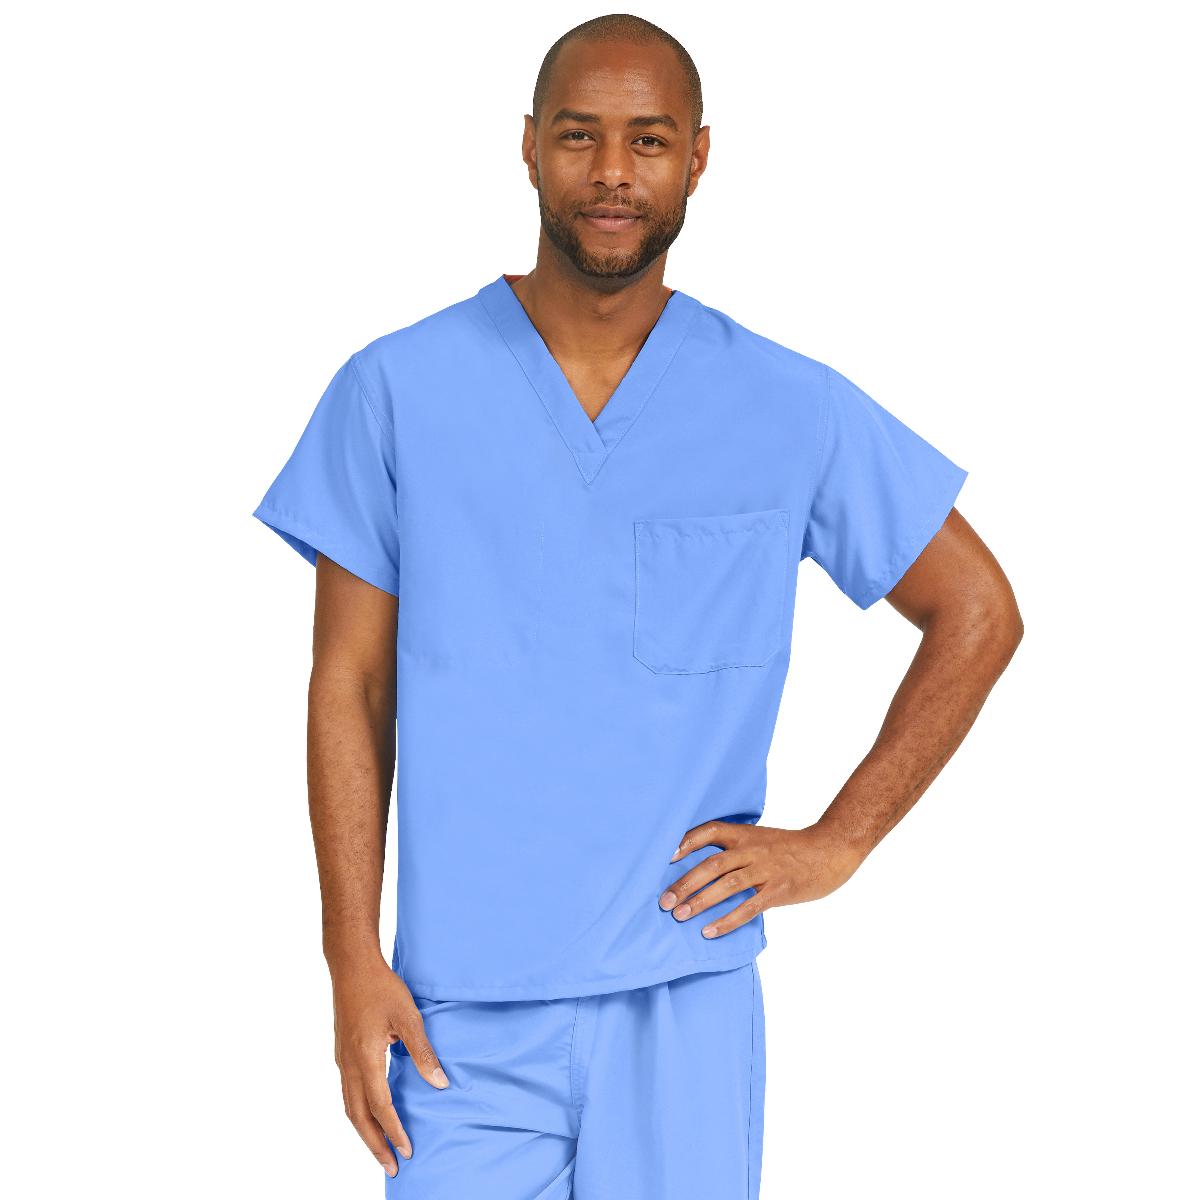 PerforMAX Unisex Reversible V-Neck Scrub Tops with 2 Pockets 